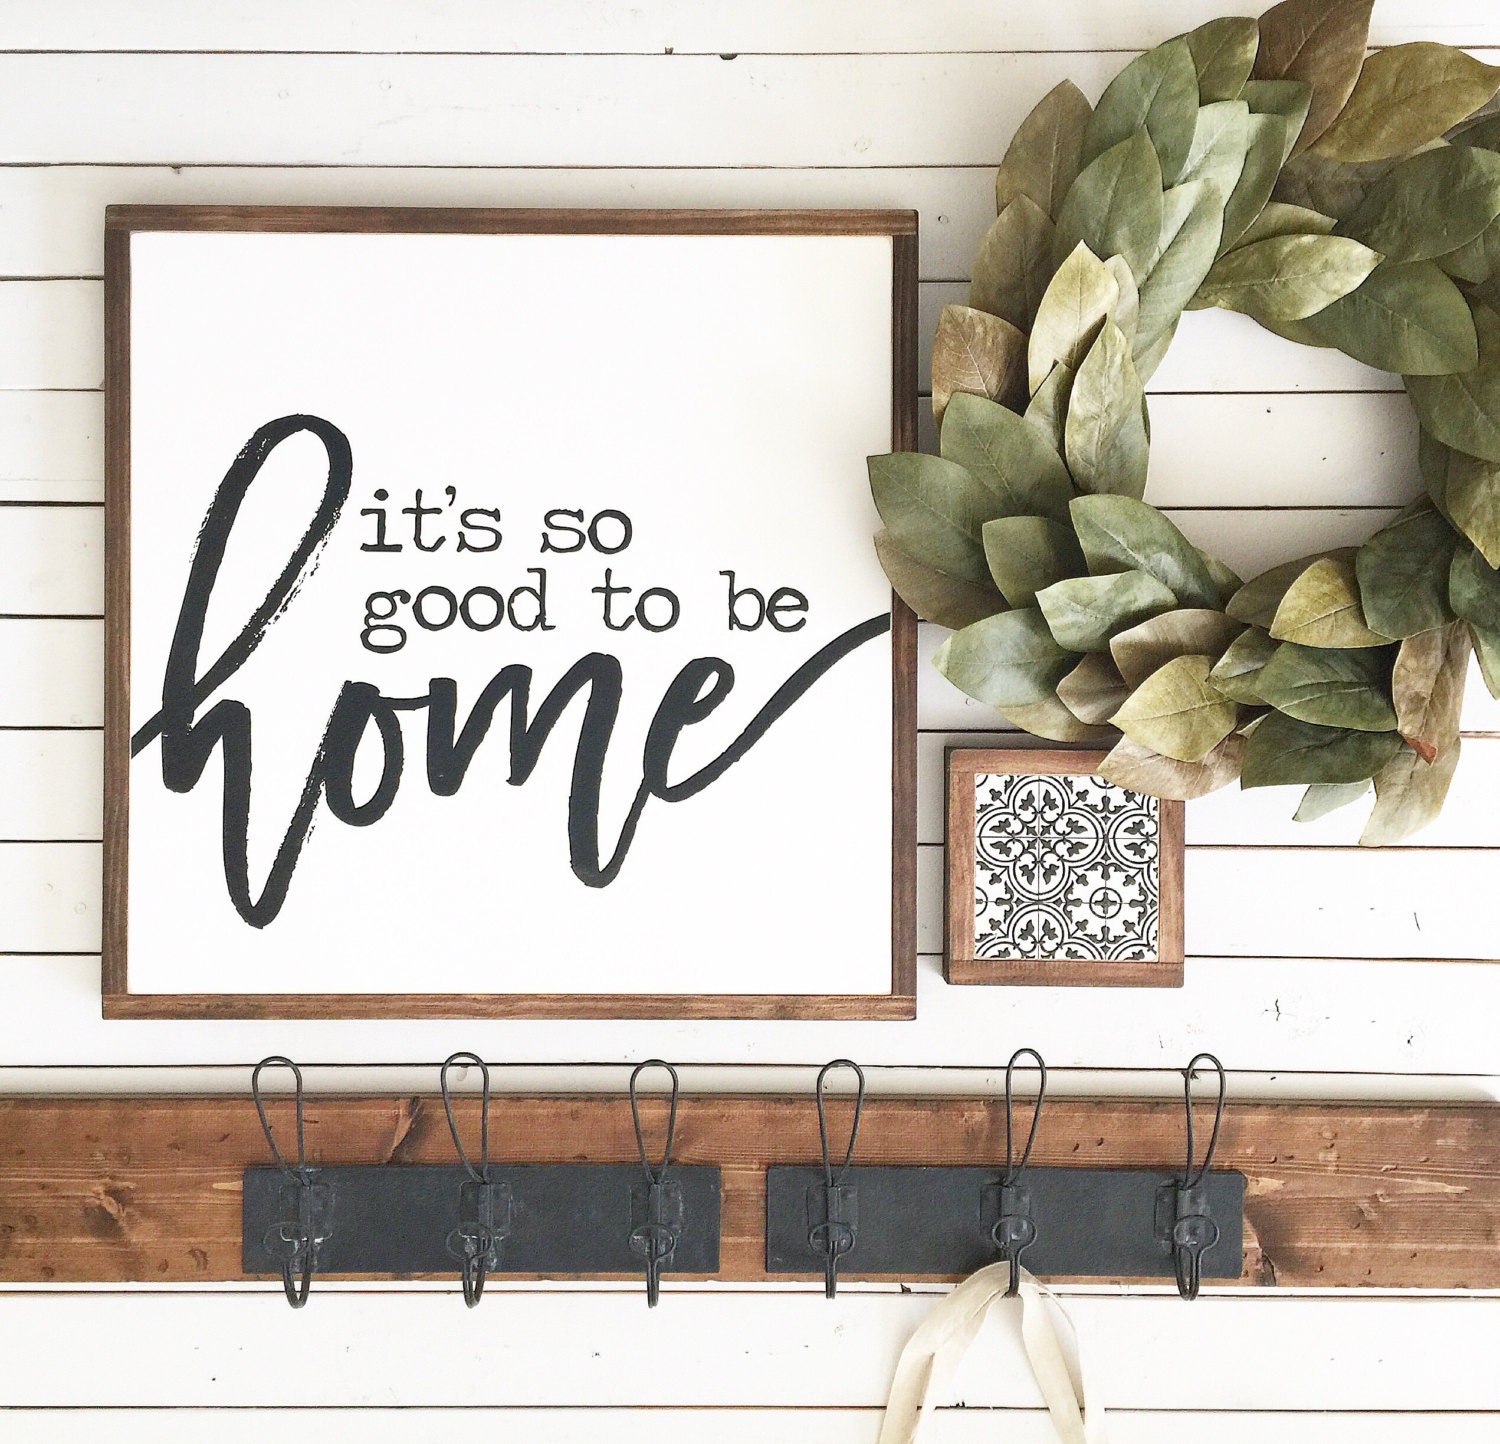 Download the ORIGINAL 24x24 it's so good to be home sign as